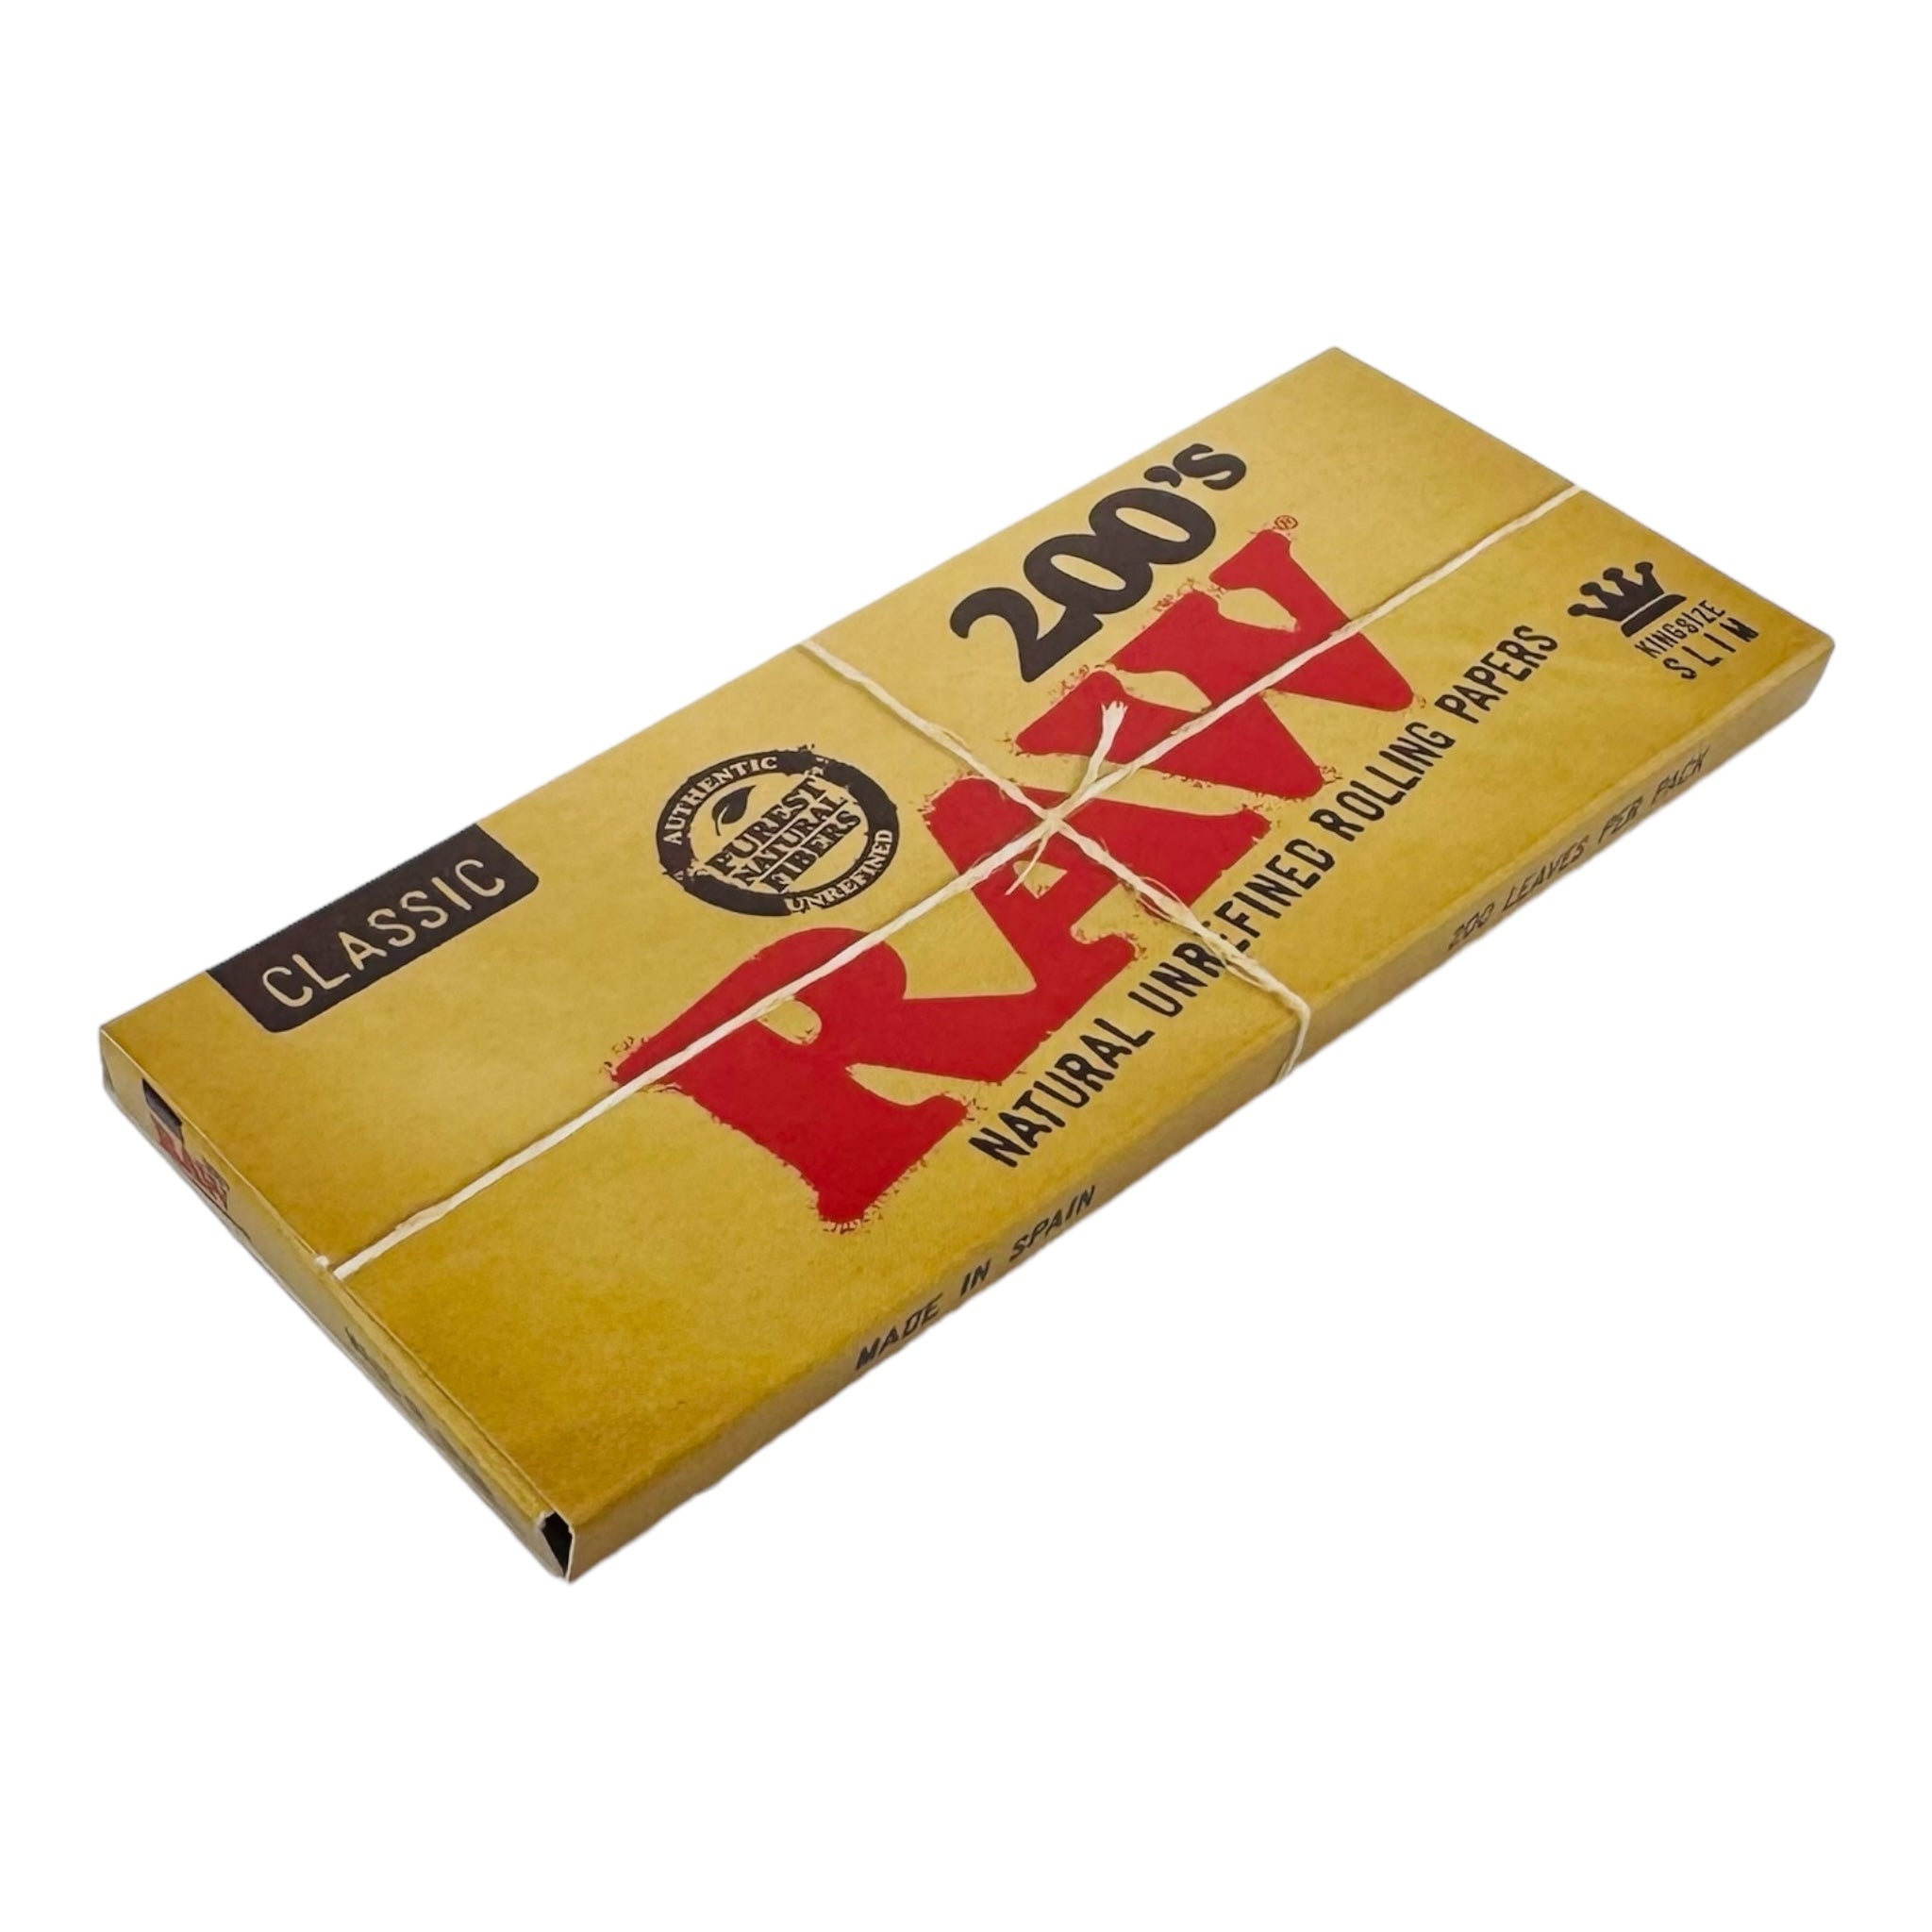 RAW Classic Hemp King Size Slim 200's Rolling Papers for sale